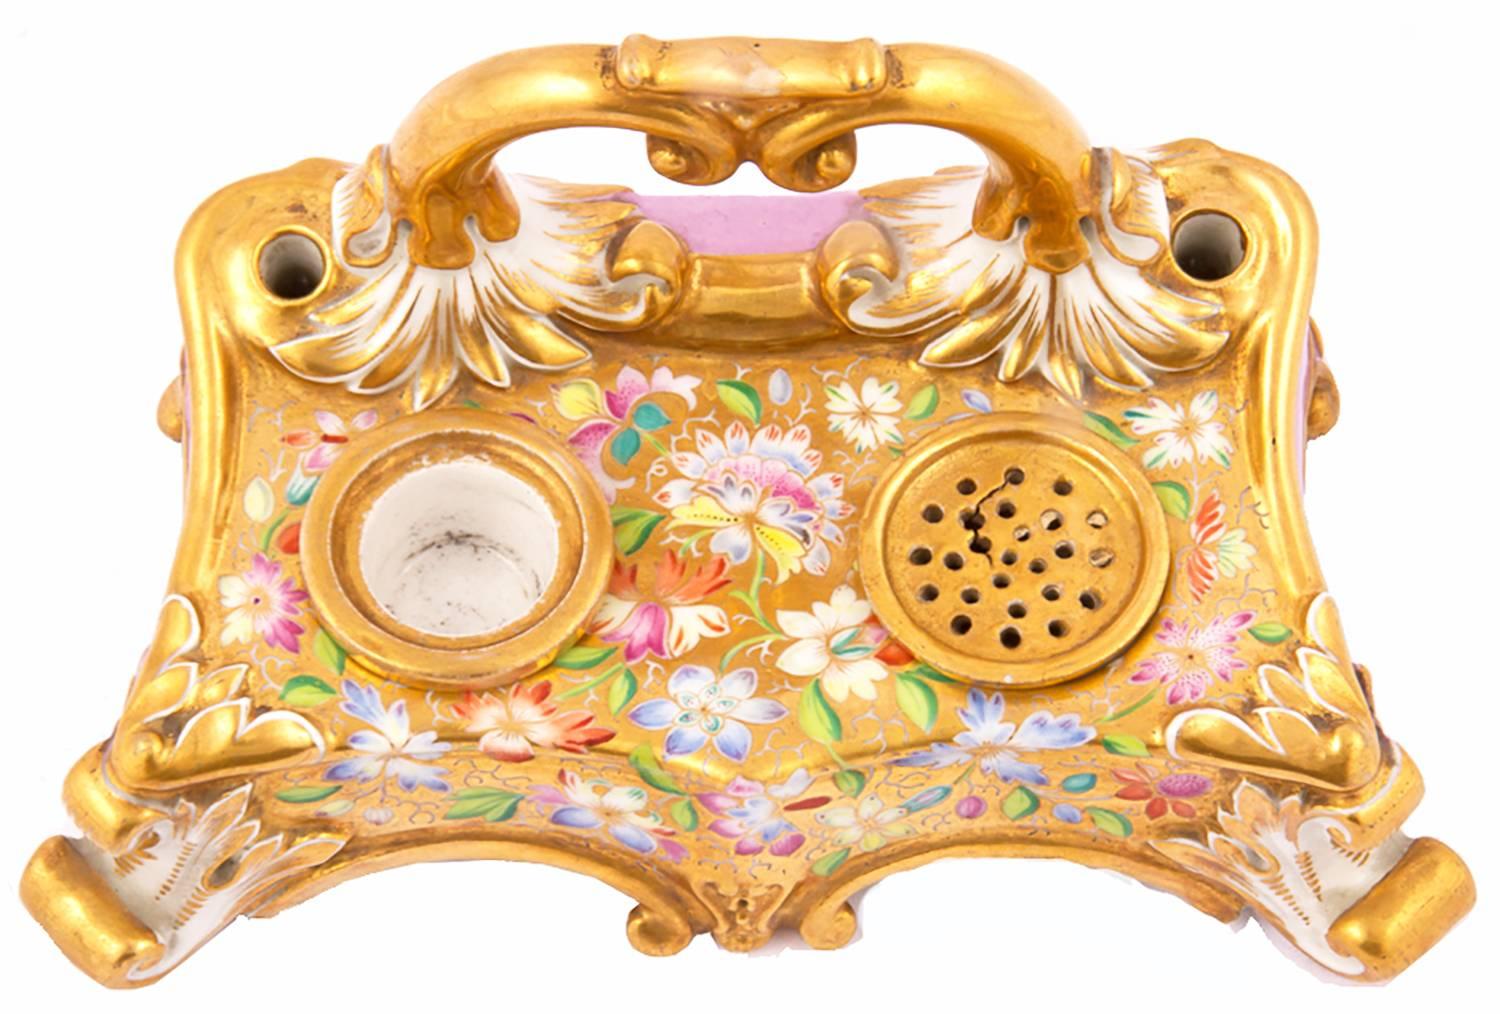 French Haviland Limoges porcelain scrolling quadrapodal rectangular ionkstand with gilt-molded handle, the gold ground painted with flowers, with sander and well, and two holes for pens. The rear of the stand painted with pink ground